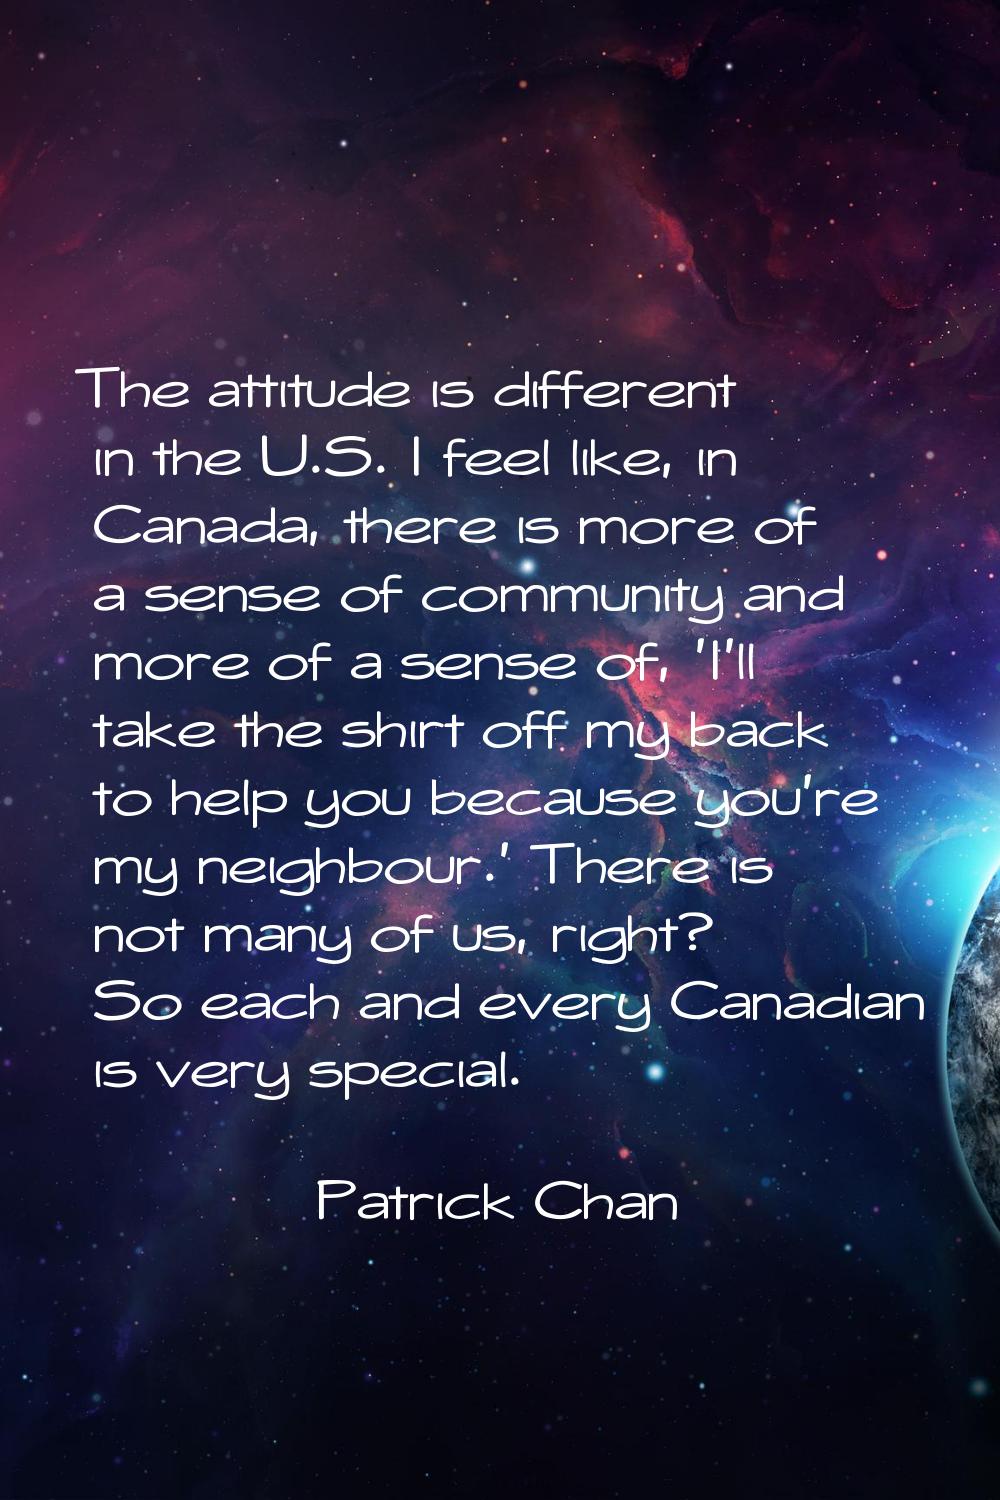 The attitude is different in the U.S. I feel like, in Canada, there is more of a sense of community